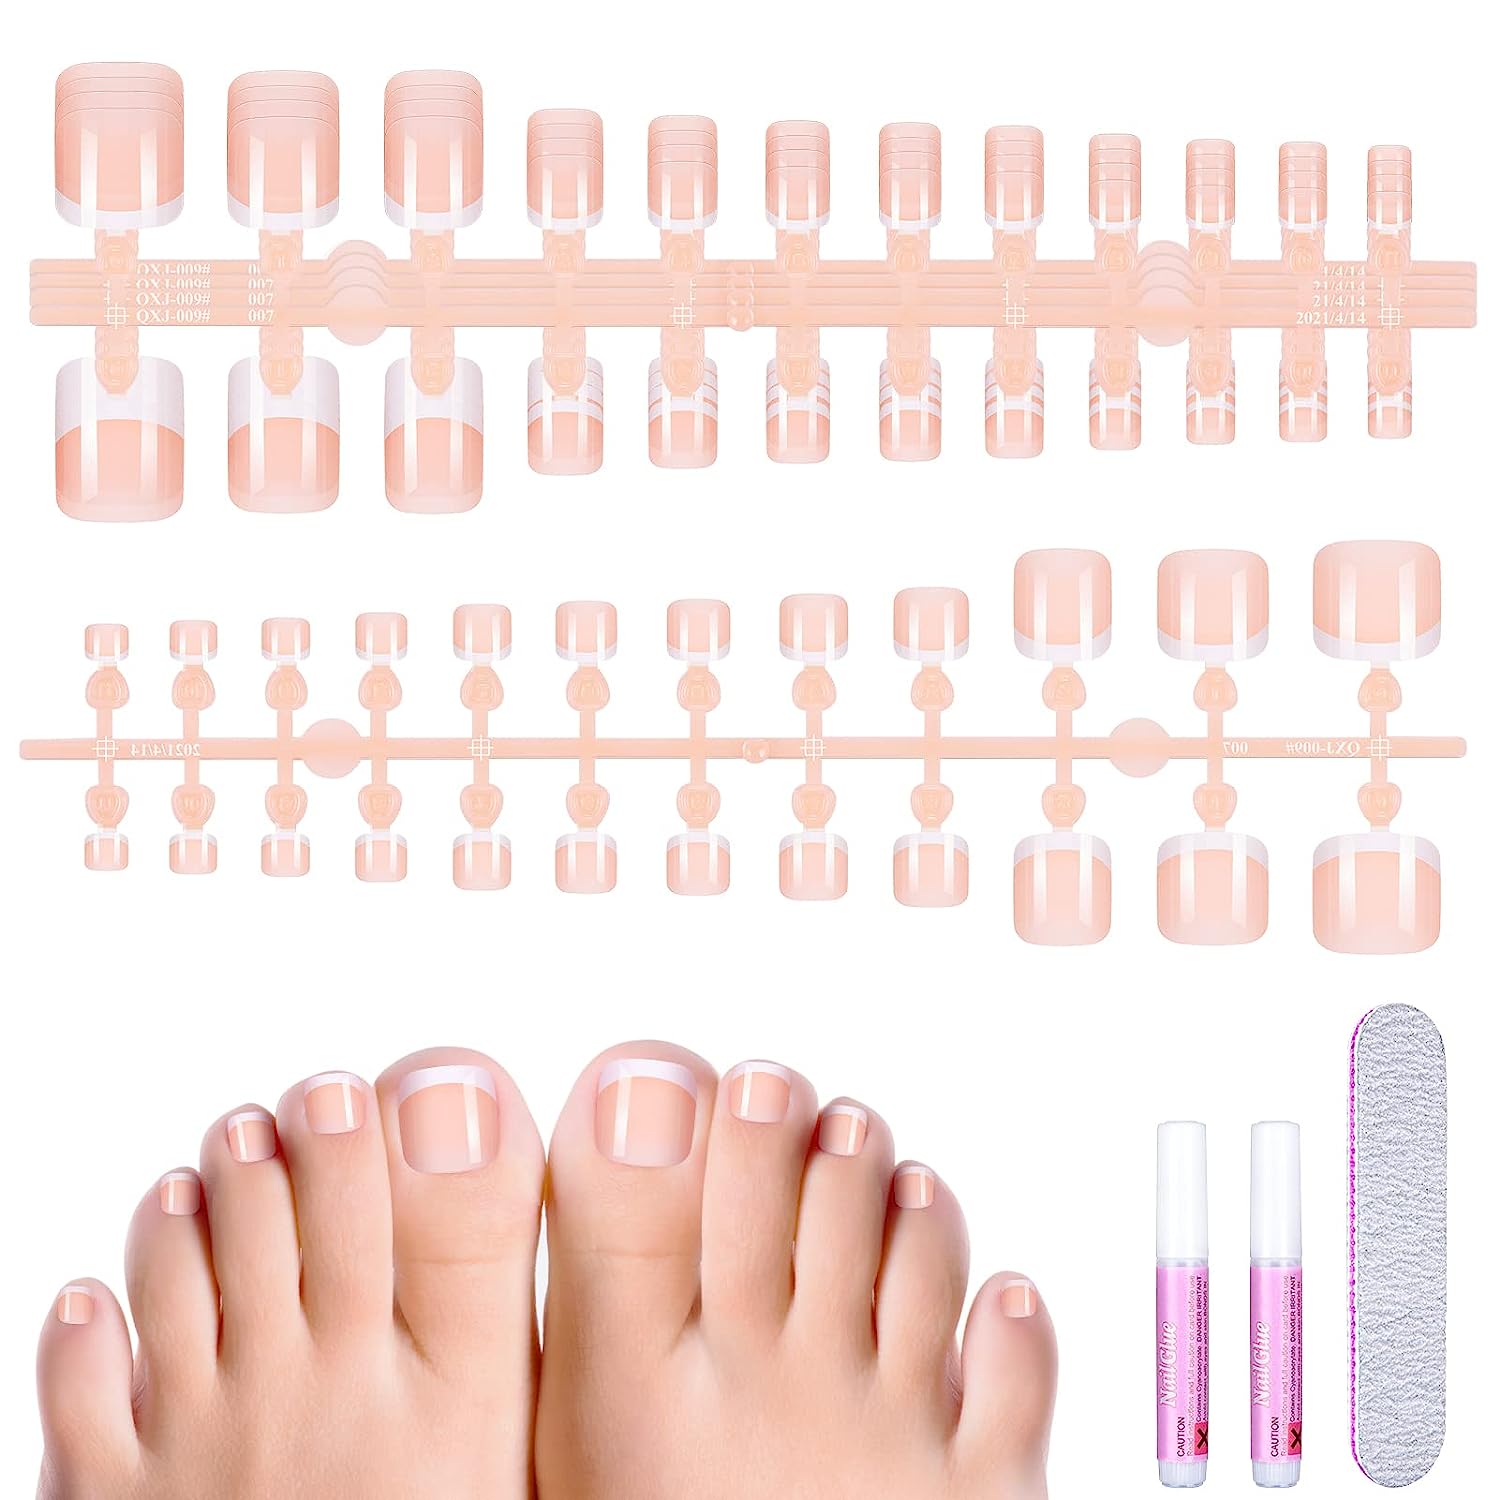 Melliex Pack of 120 False toenails Kit, French Natural Artificial Toenails for Sticking, Full Cover Toe Nails Tips for Women, 12 SIES